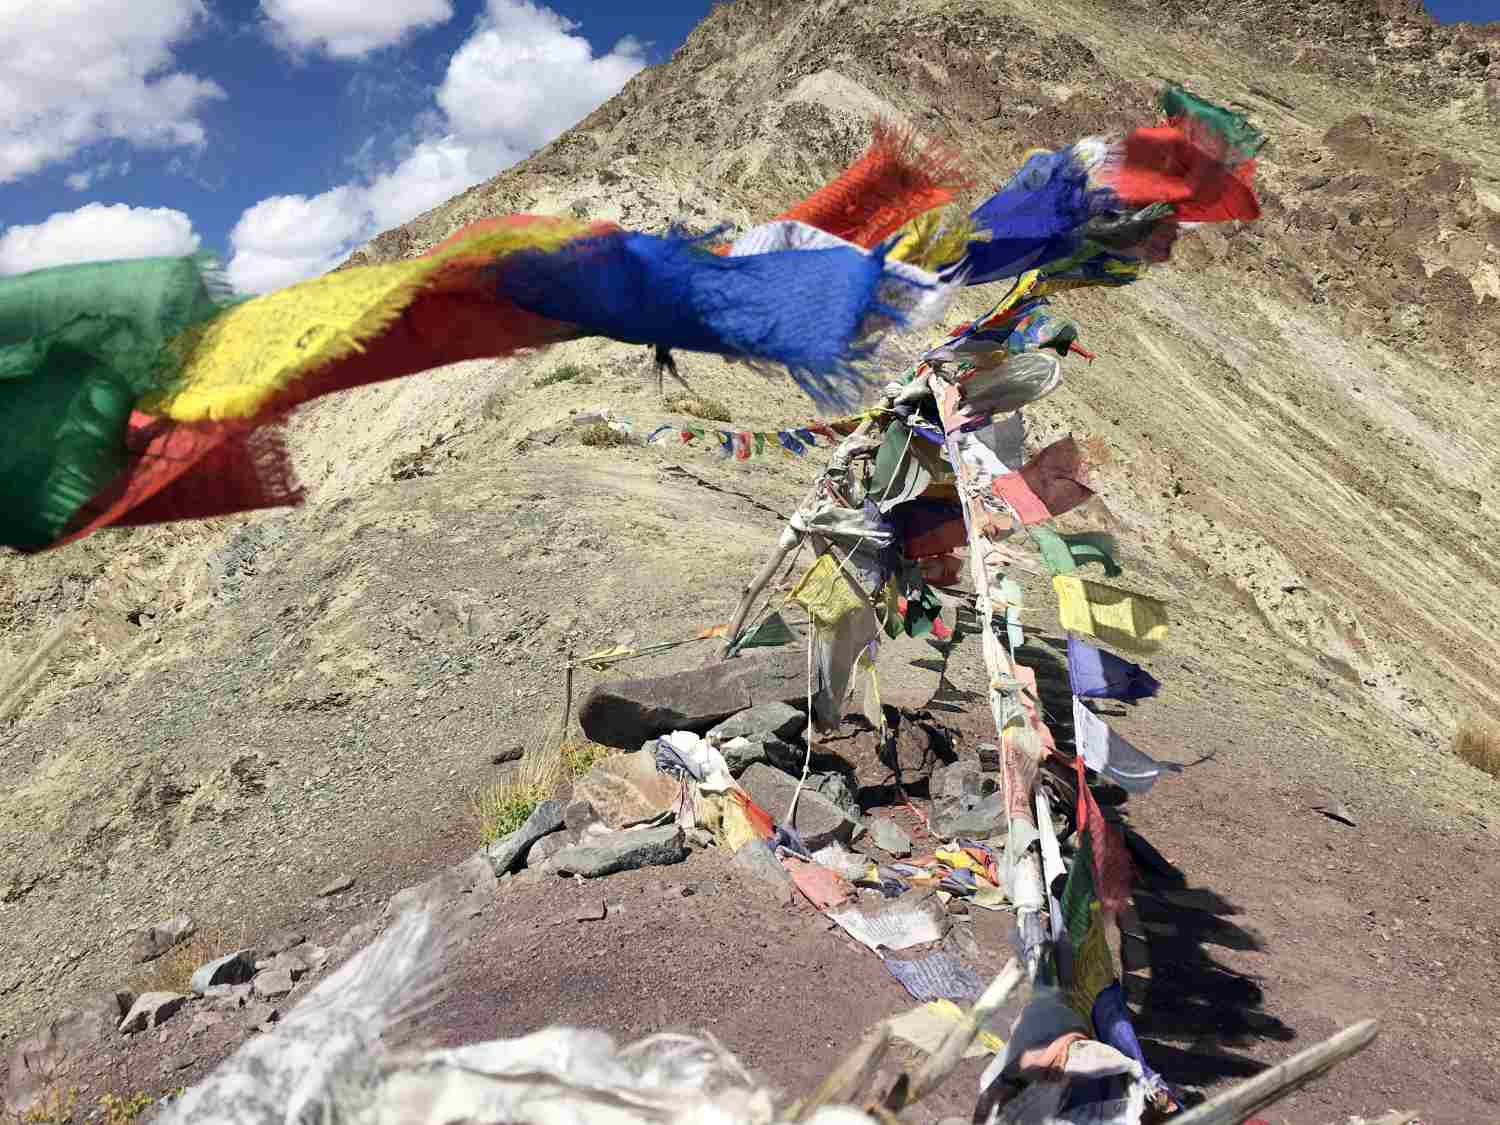 The prayer flags are our constant companions